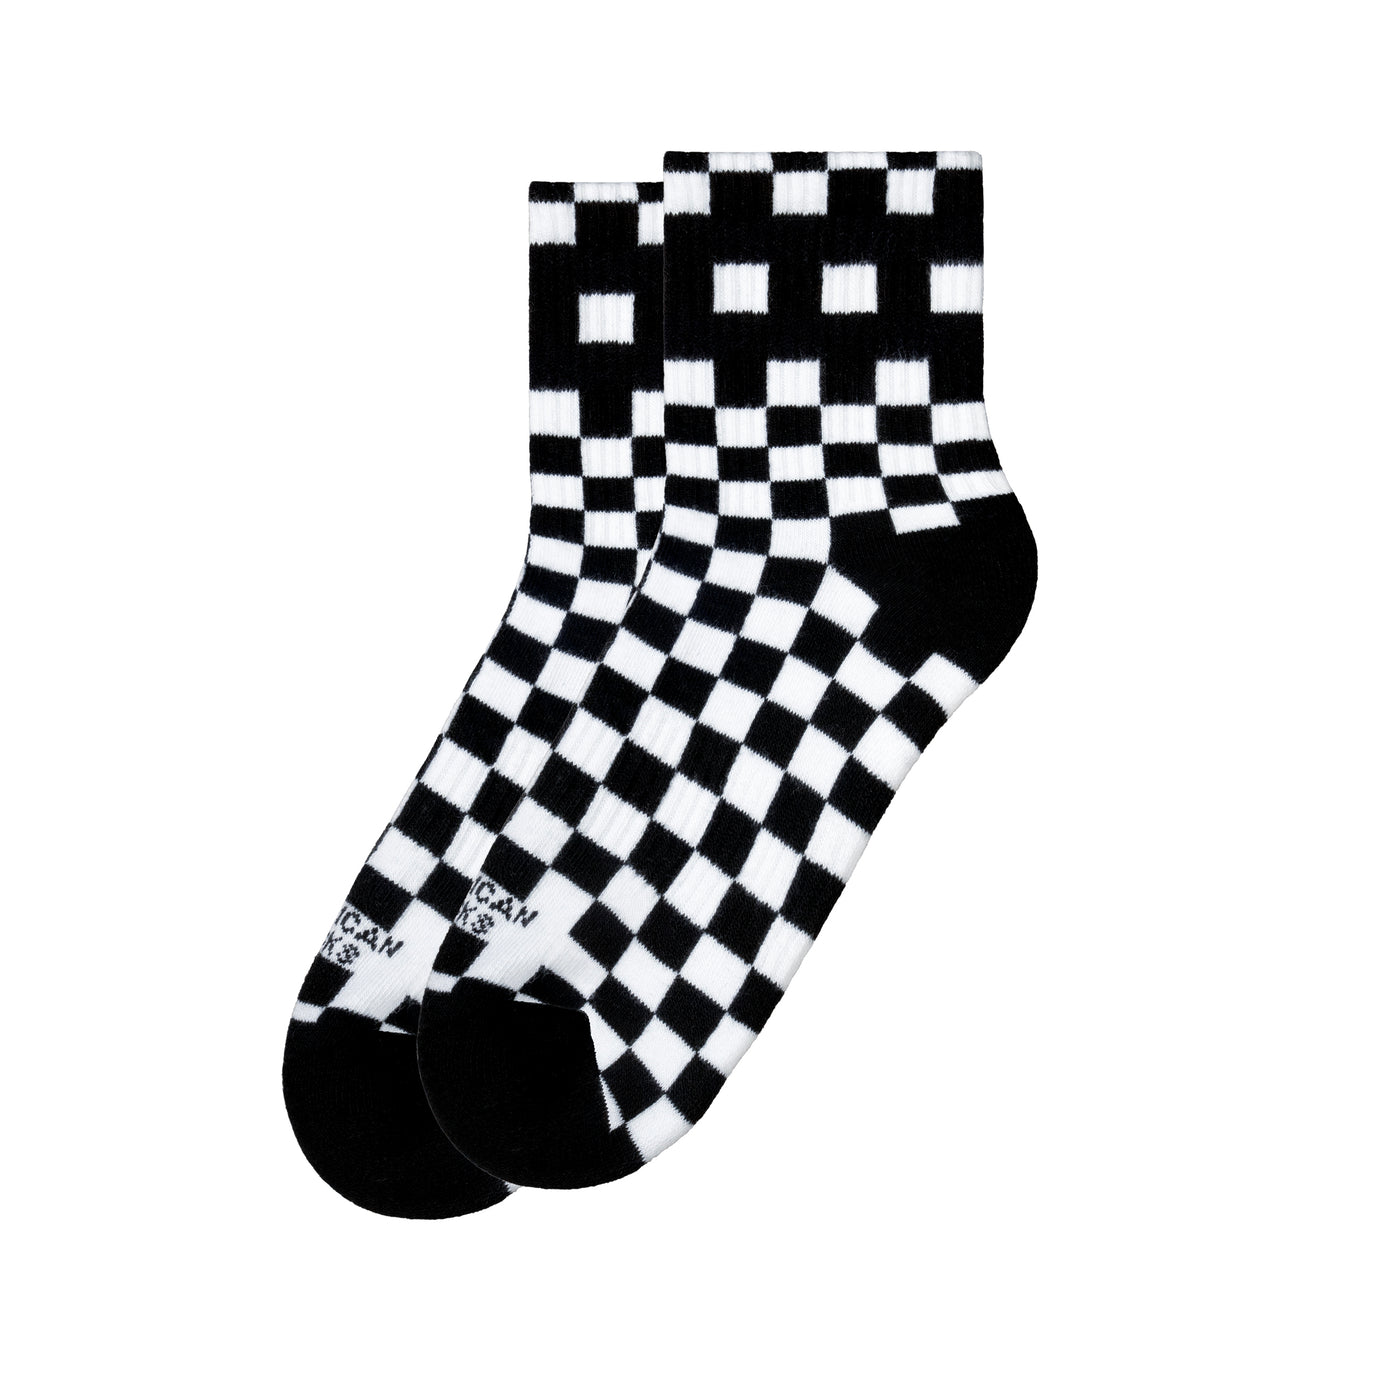 Checkerboard B/W - Ankle High